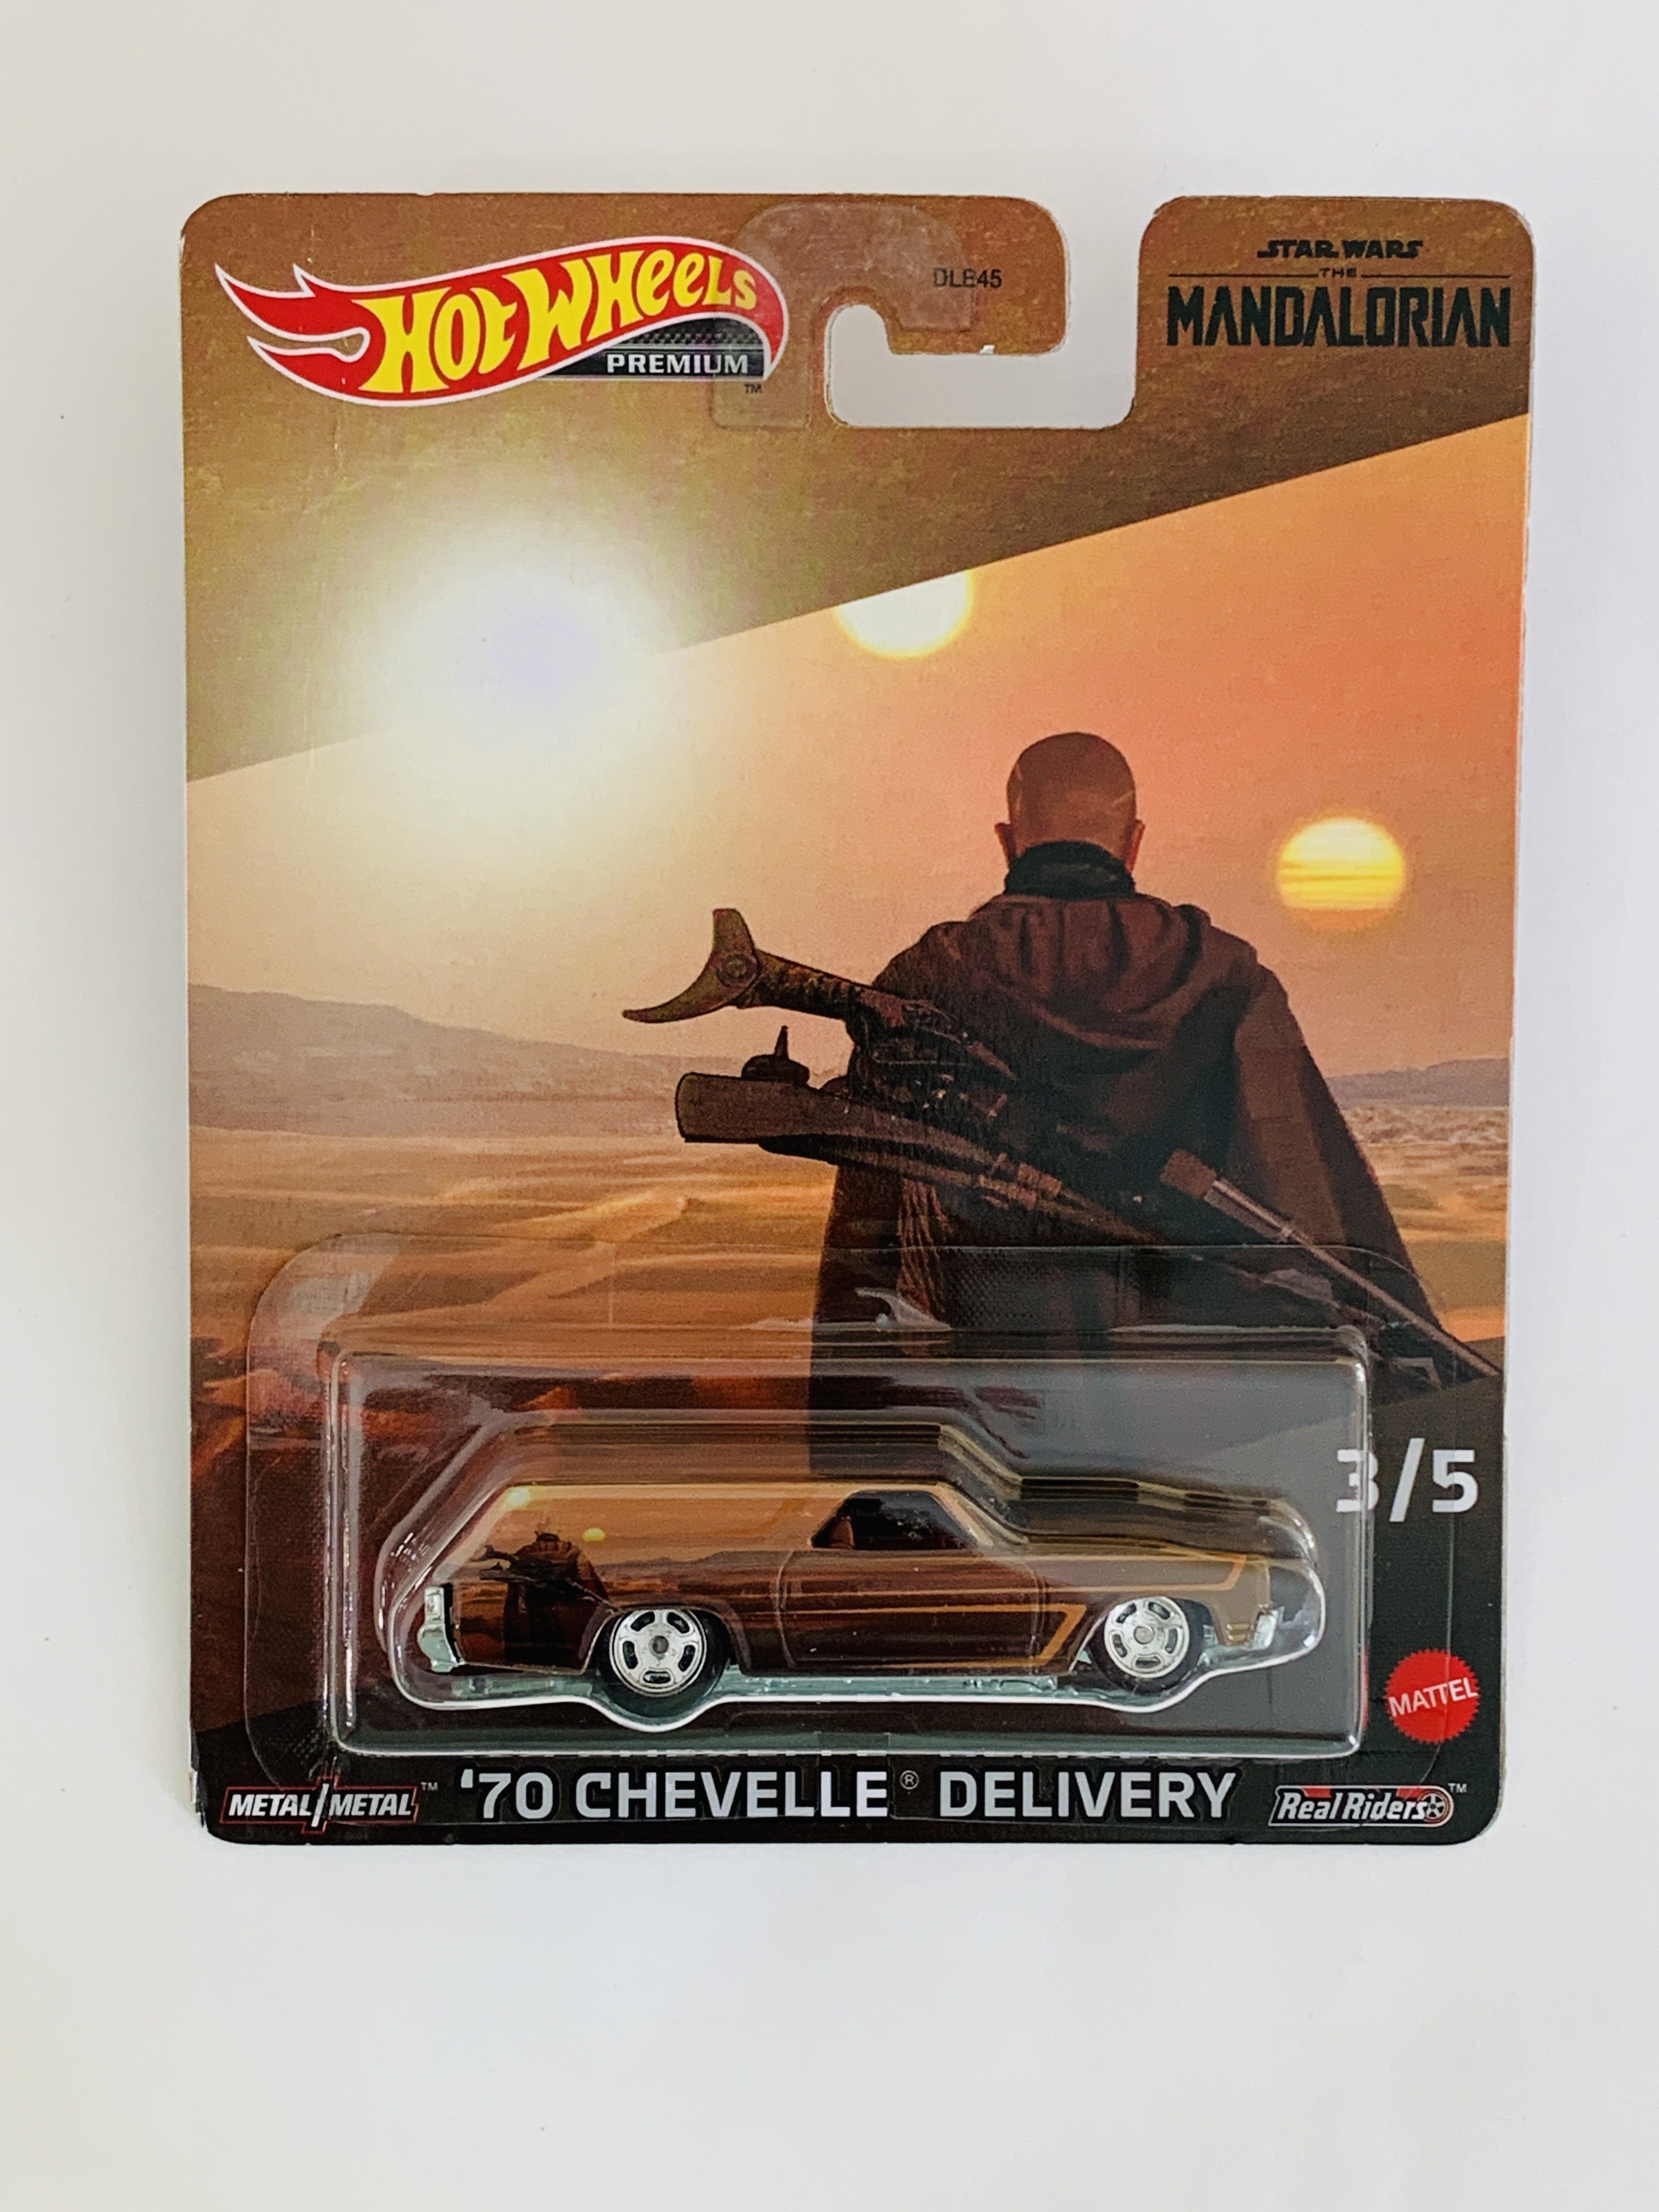 Hot Wheels Premium Star Wars The Mandalorian '70 Chevelle Delivery